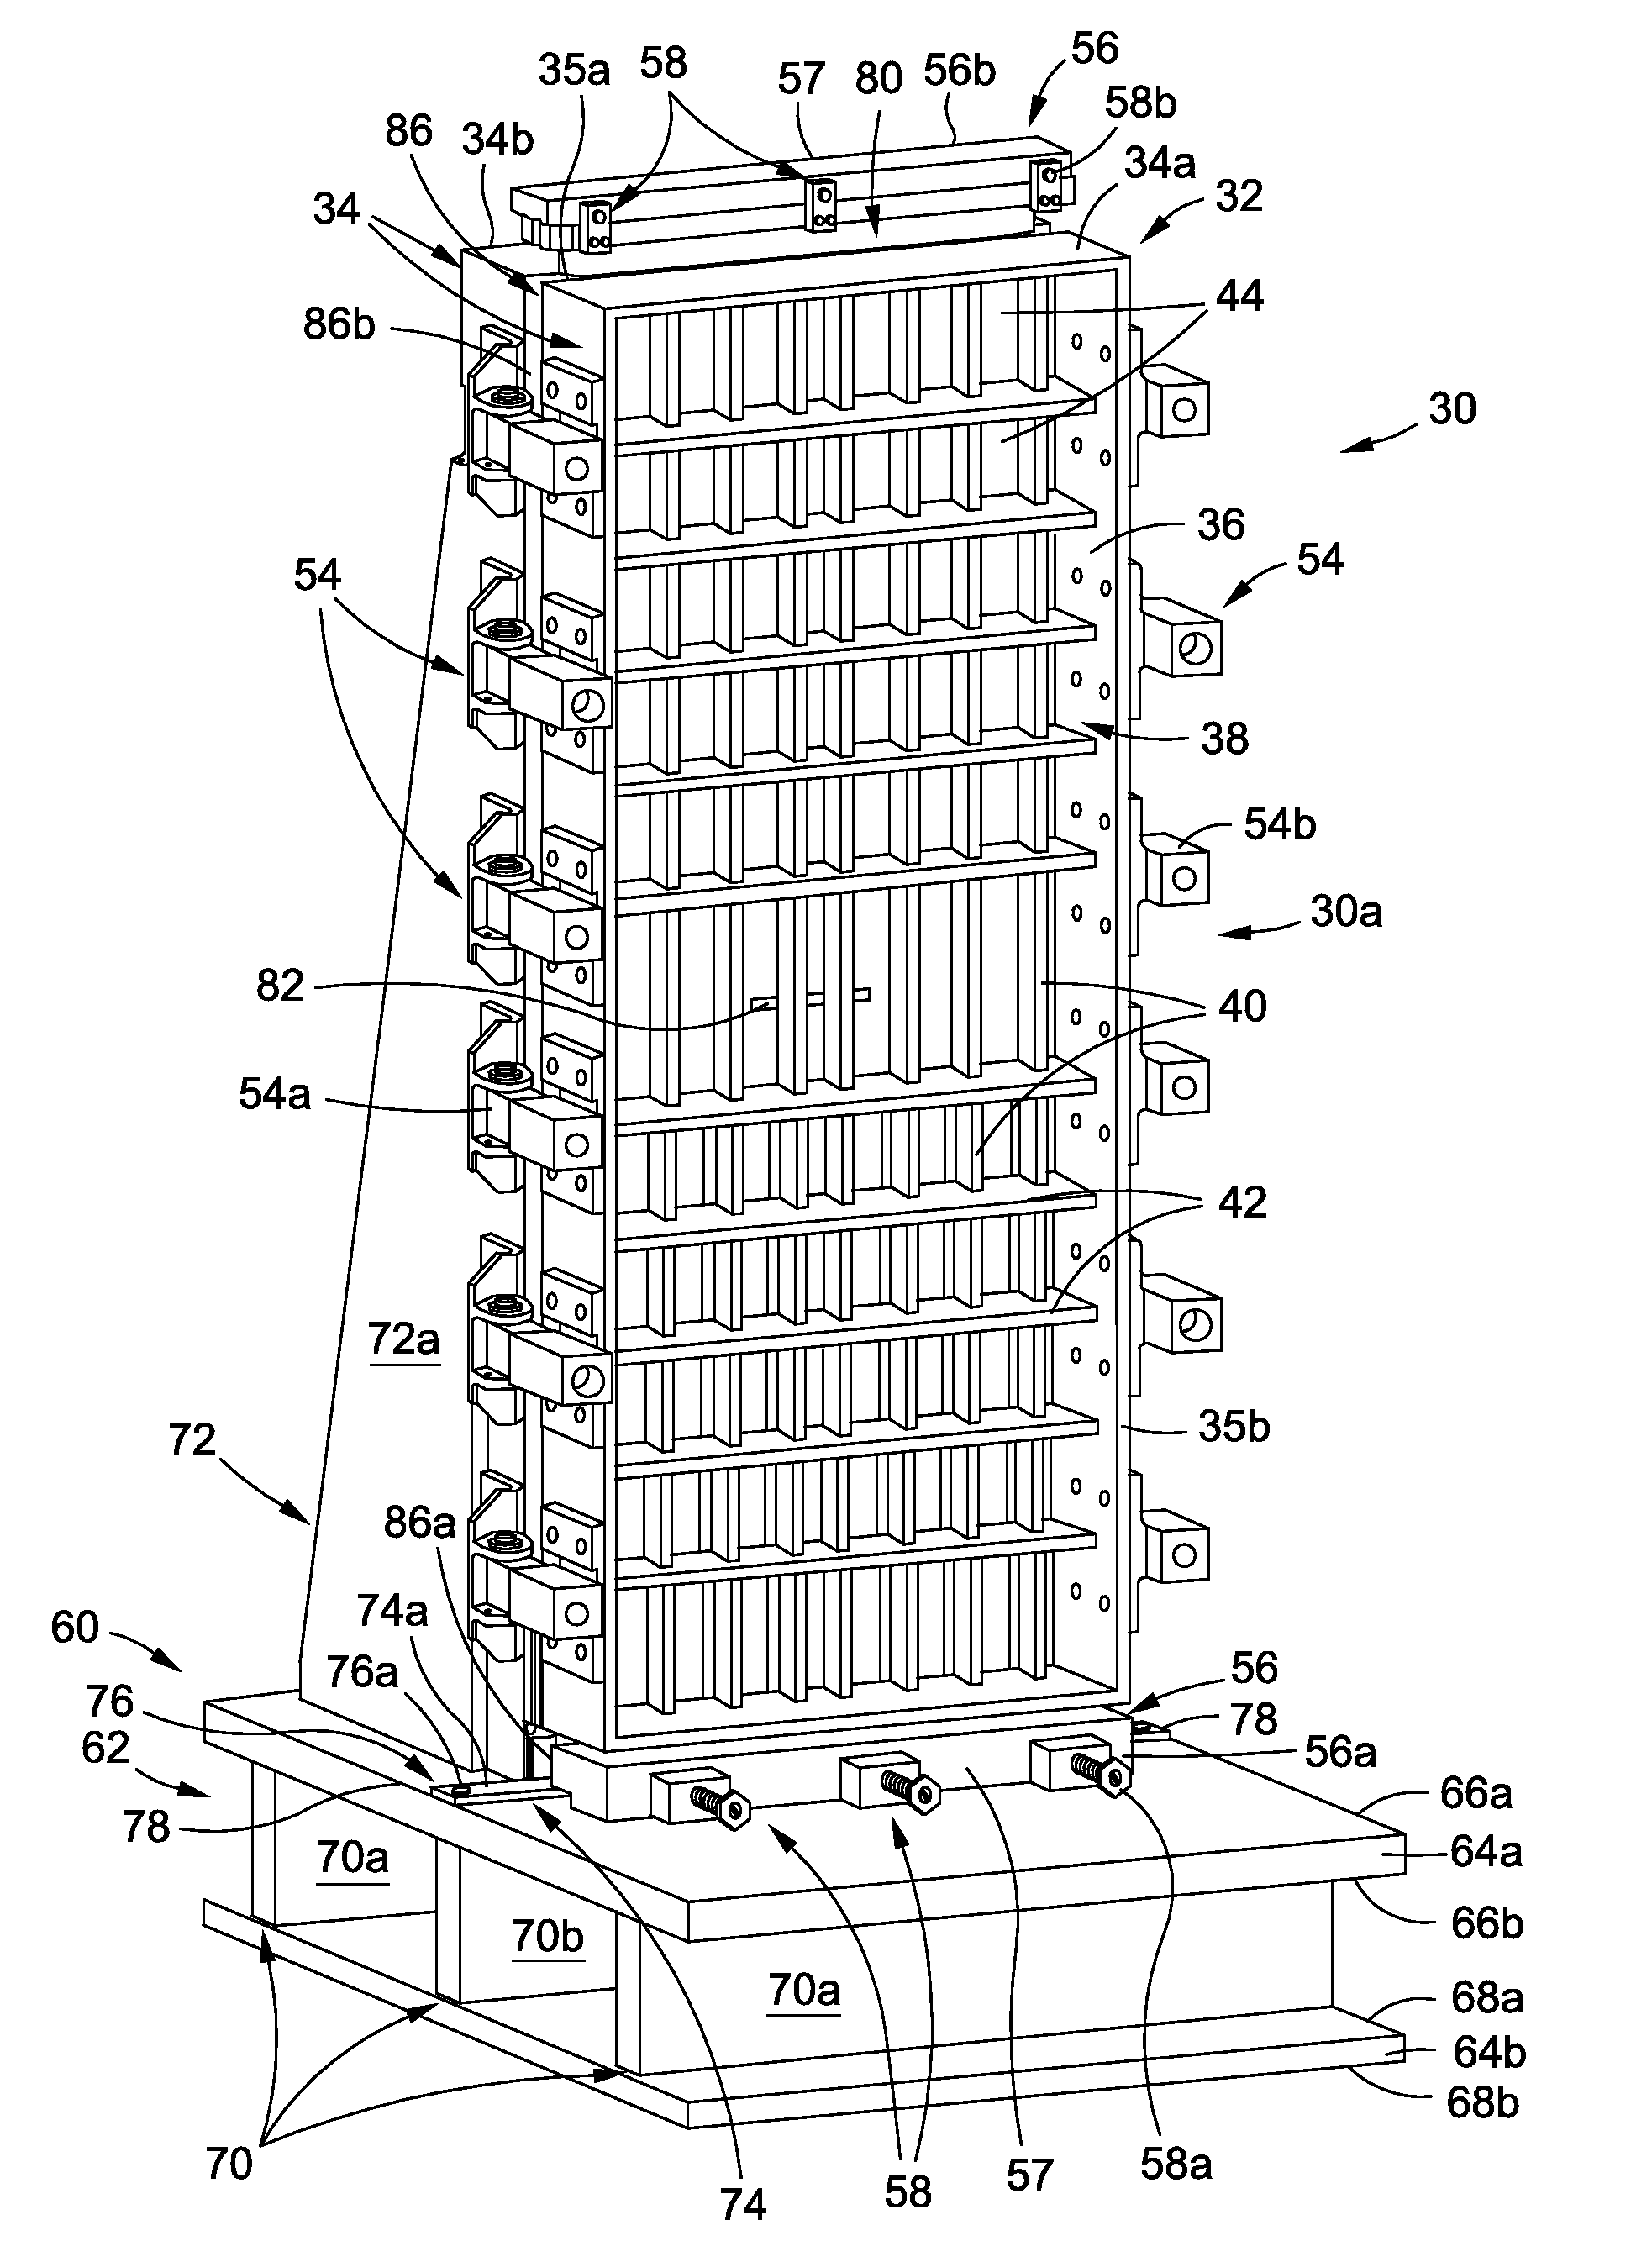 Apparatus, System and Method for Compression Testing of Test Specimens